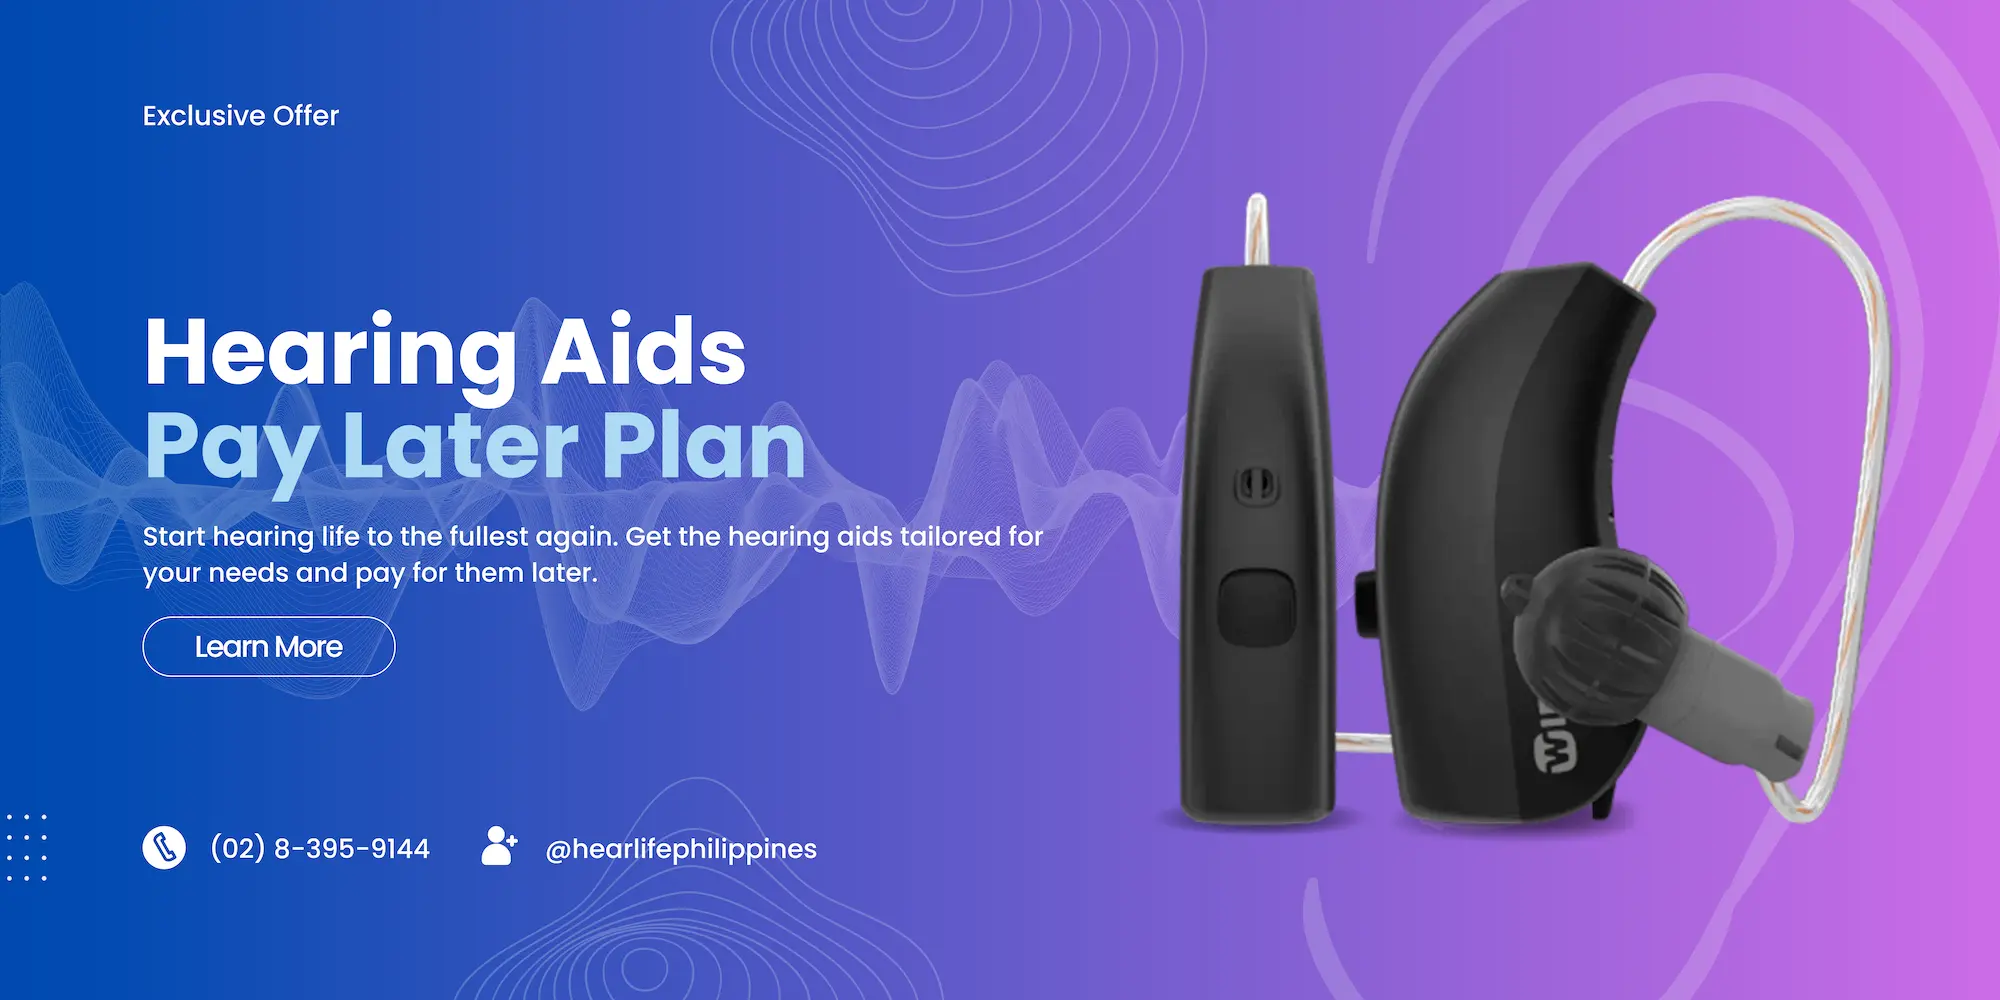 Hearing Aids Pay Later Plan new phone wide